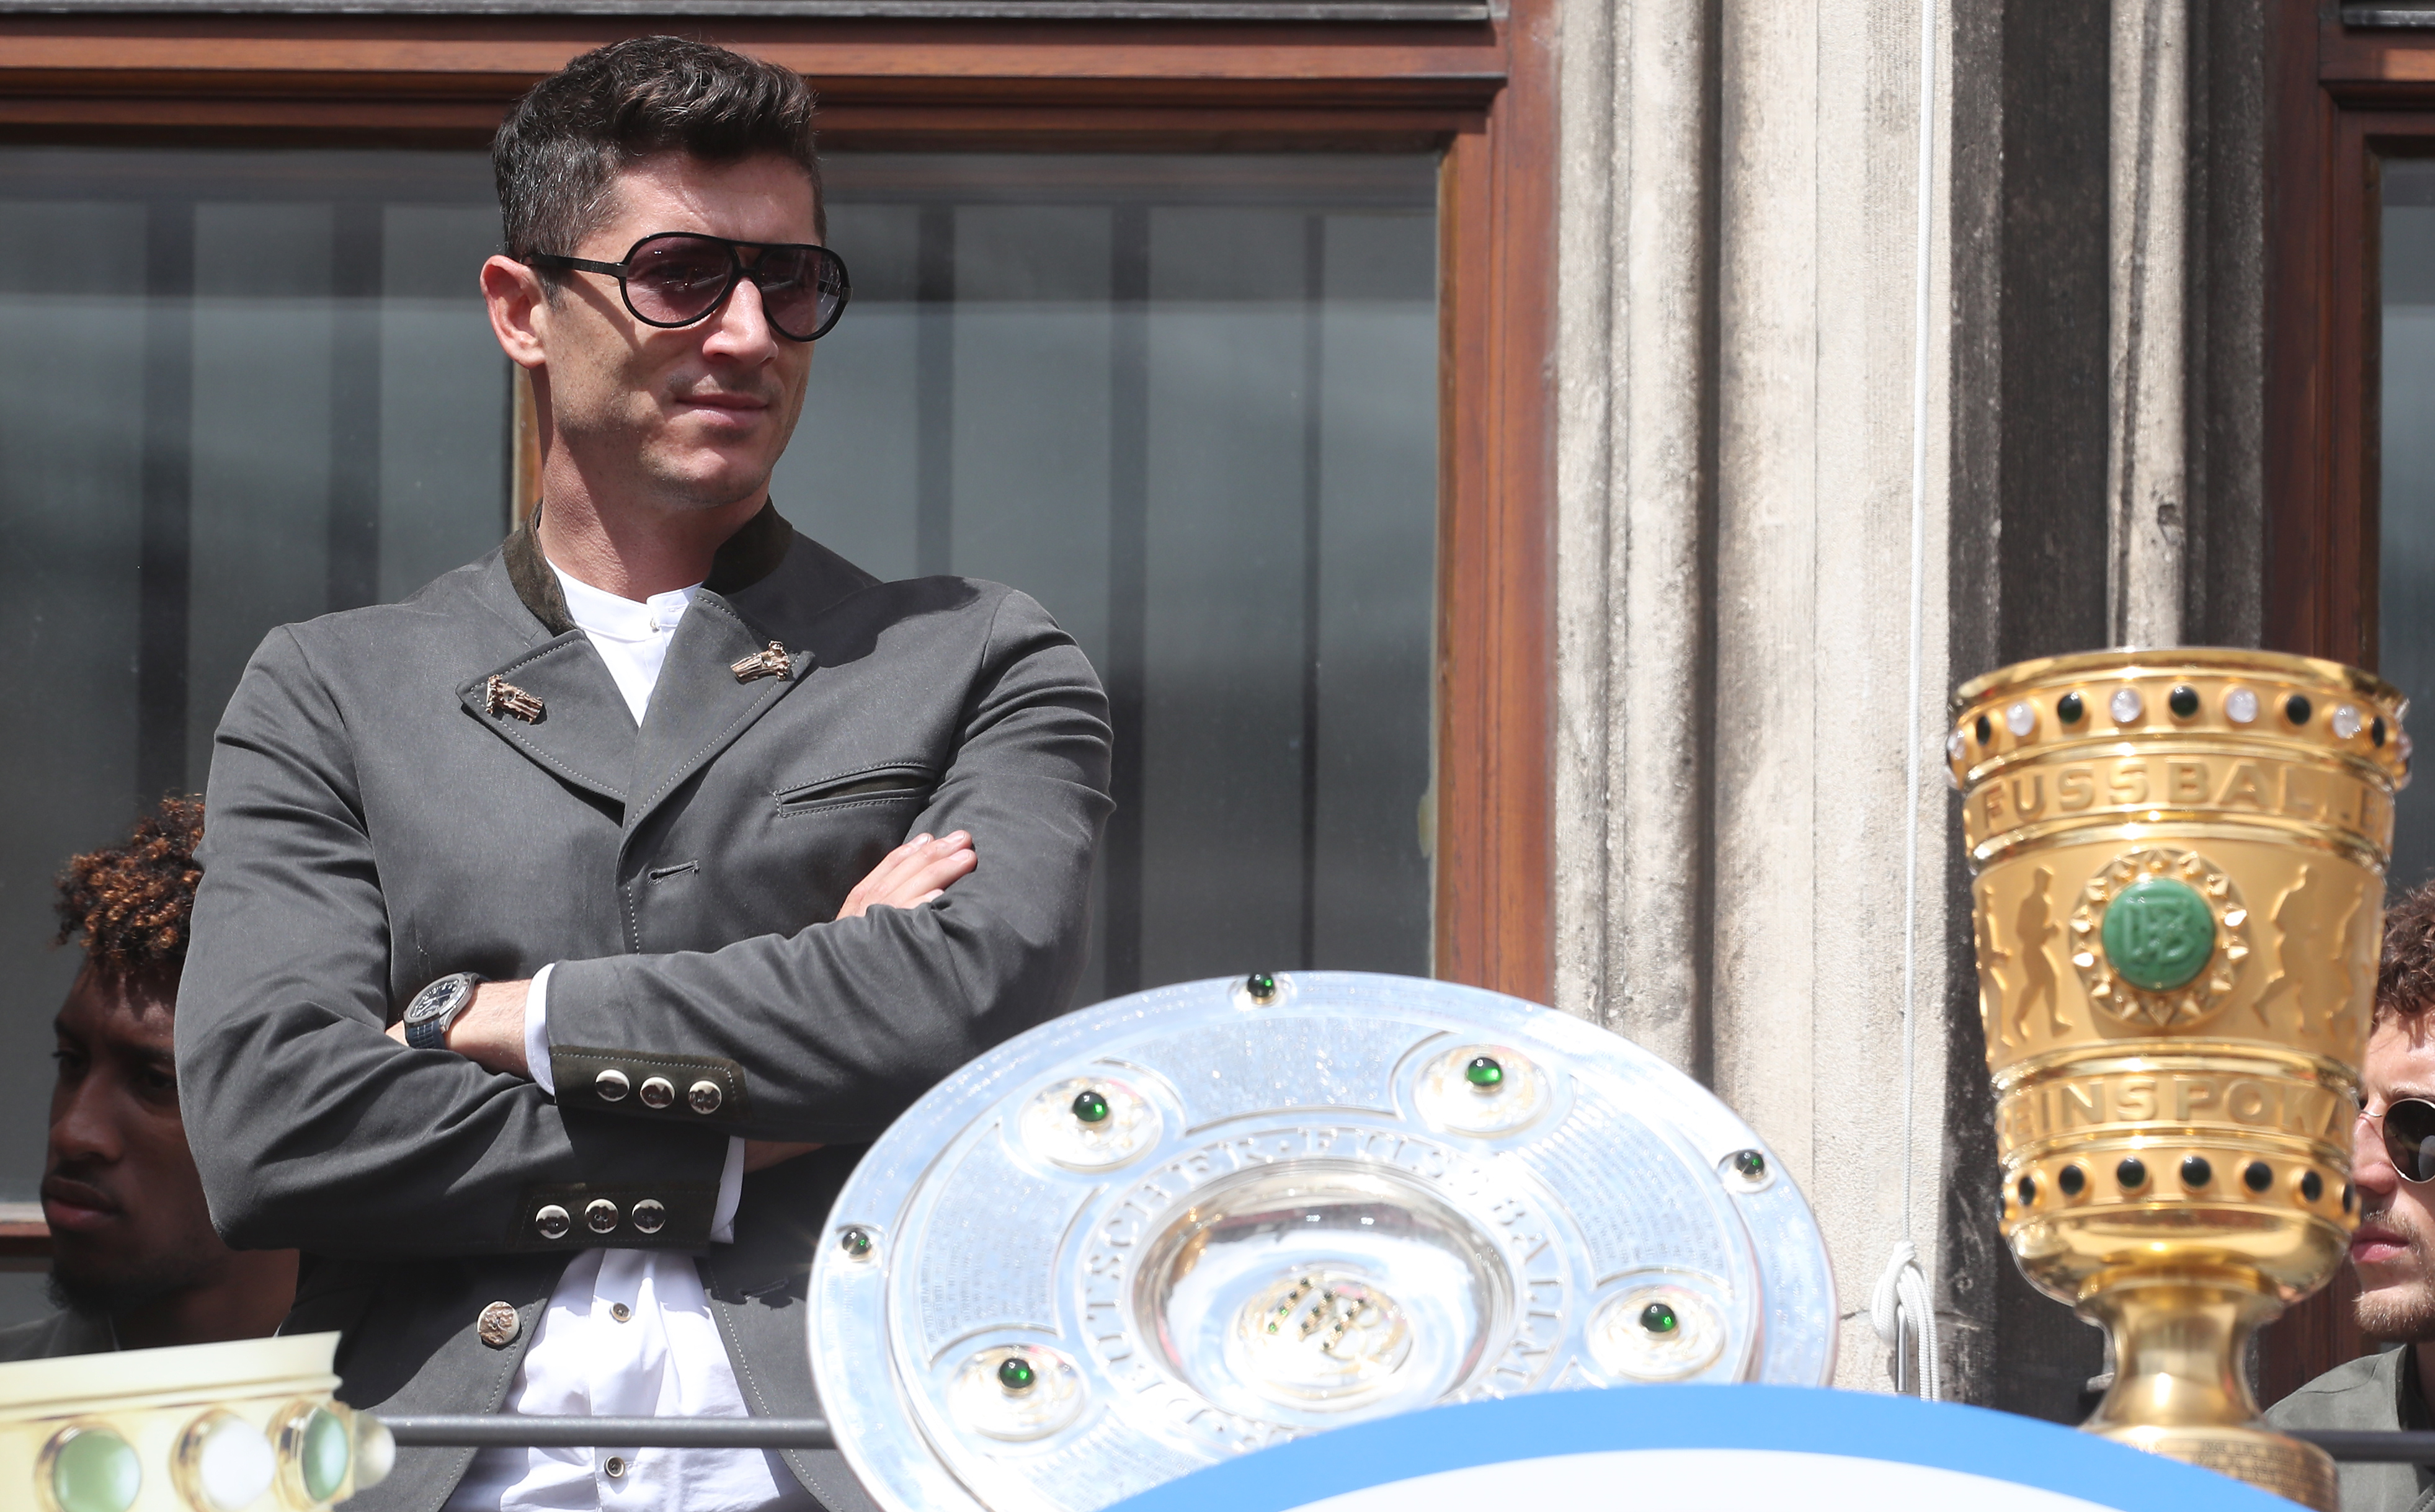 Will Lewandowski have another trophy to lift on Sunday? (Photo by Alexandra Beier/Bongarts/Getty Images)